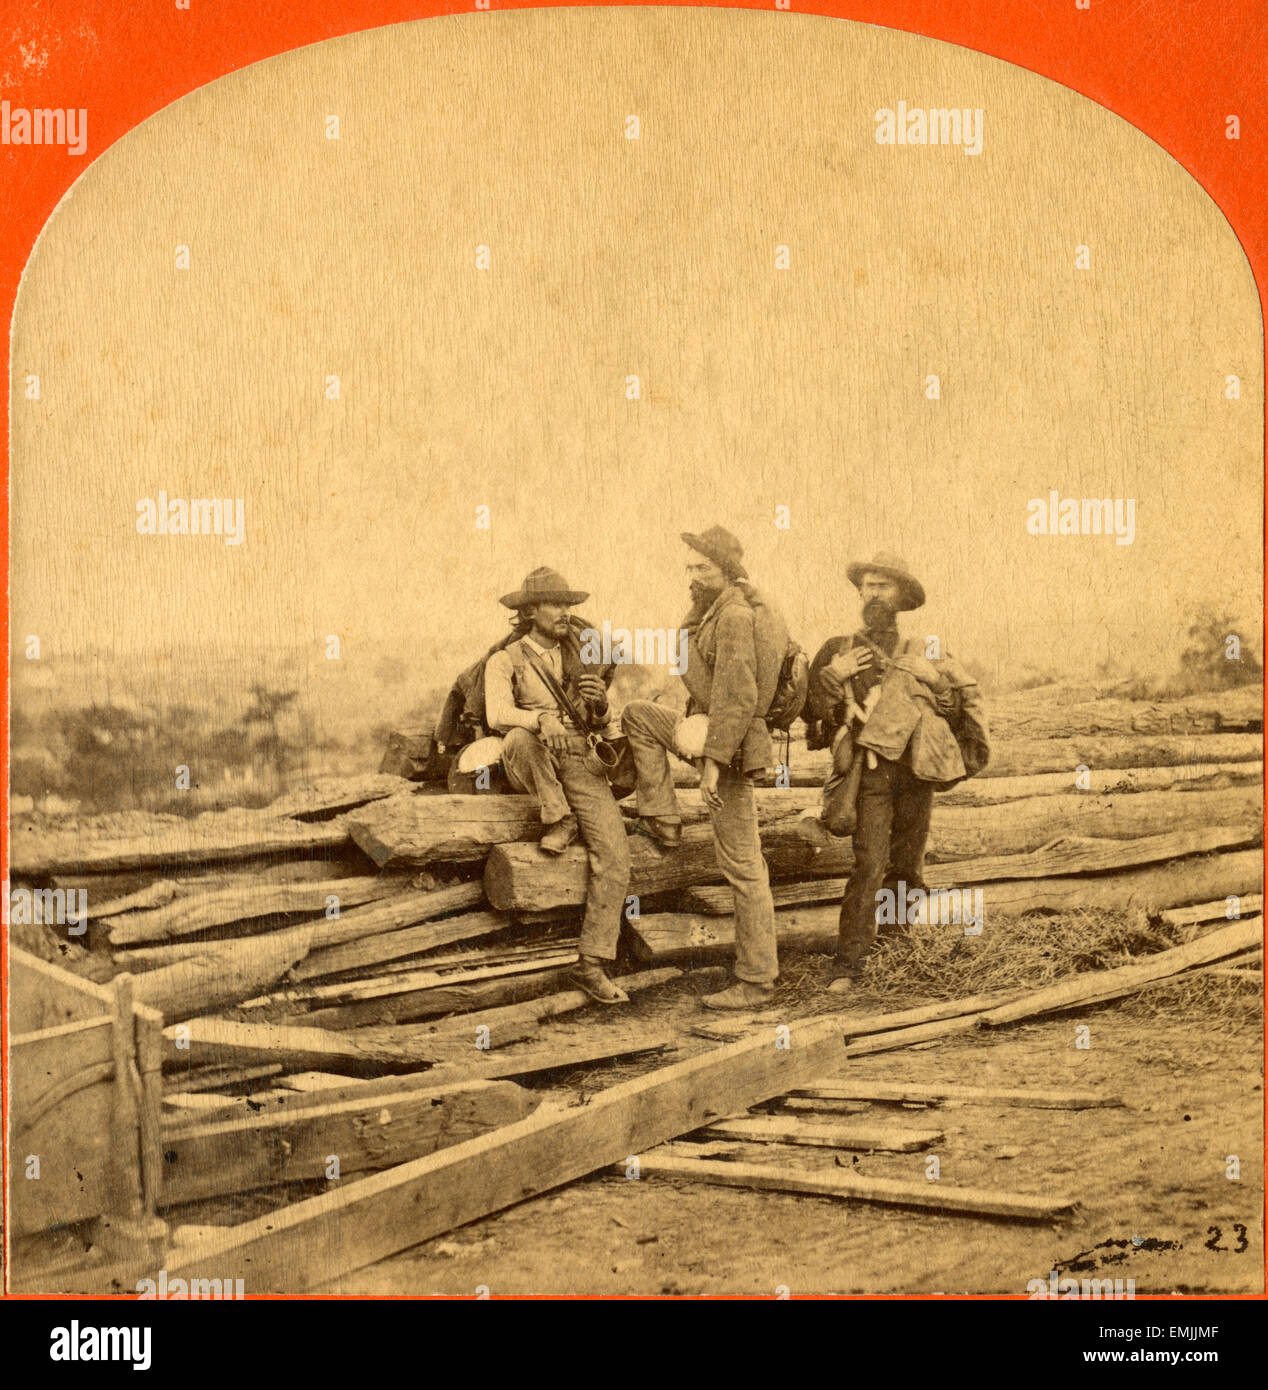 “Three ‘Johnnie Reb’ Prisoners.” Captured Confederate Soldiers, Gettysburg, Pennsylvania, USA, Single Image of Stereo Card, Circa 1863 Stock Photo